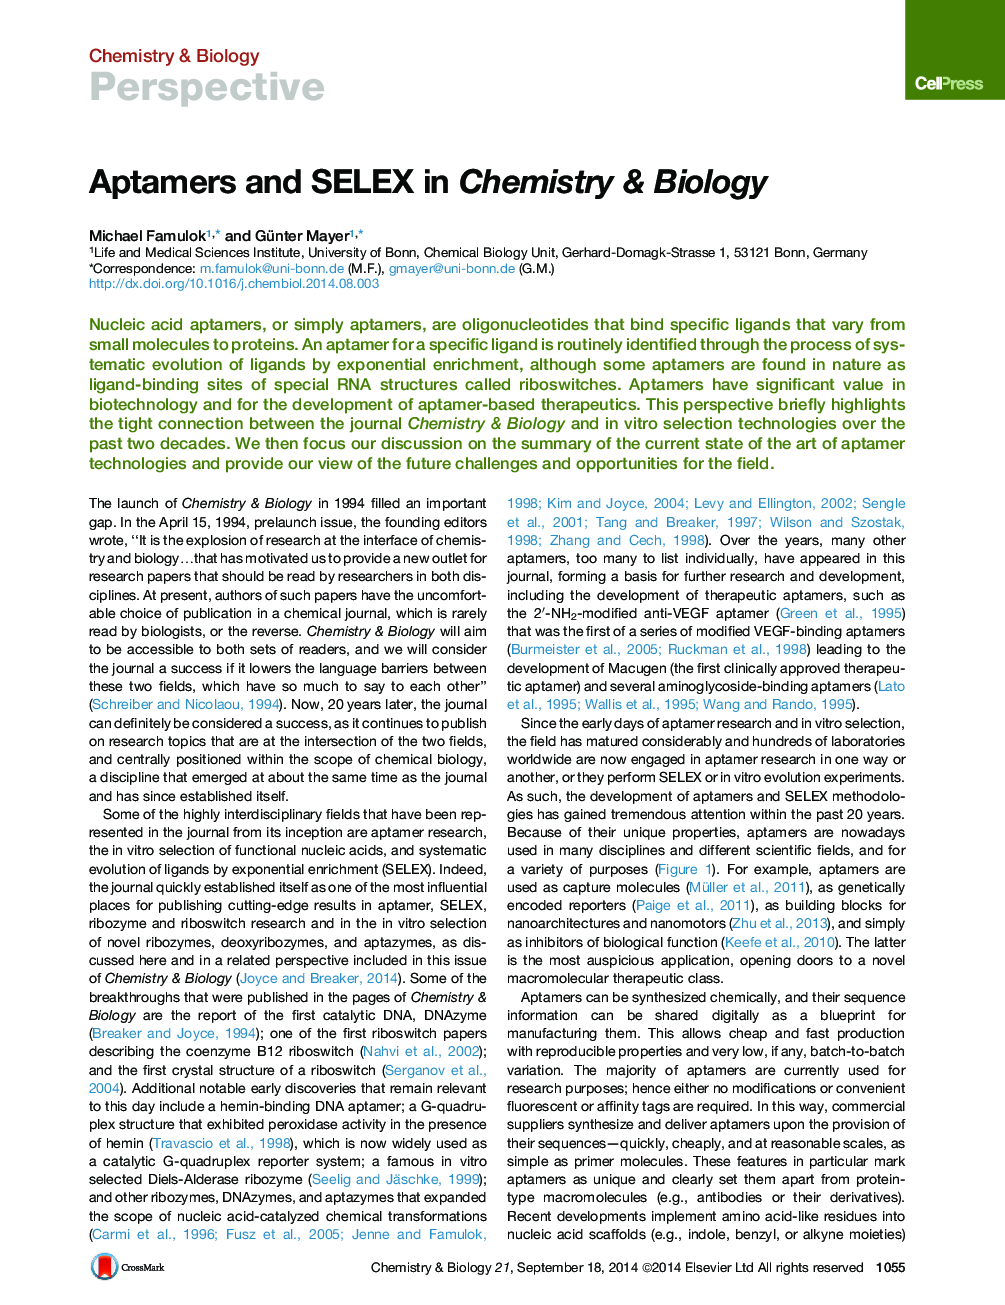 Aptamers and SELEX in Chemistry & Biology